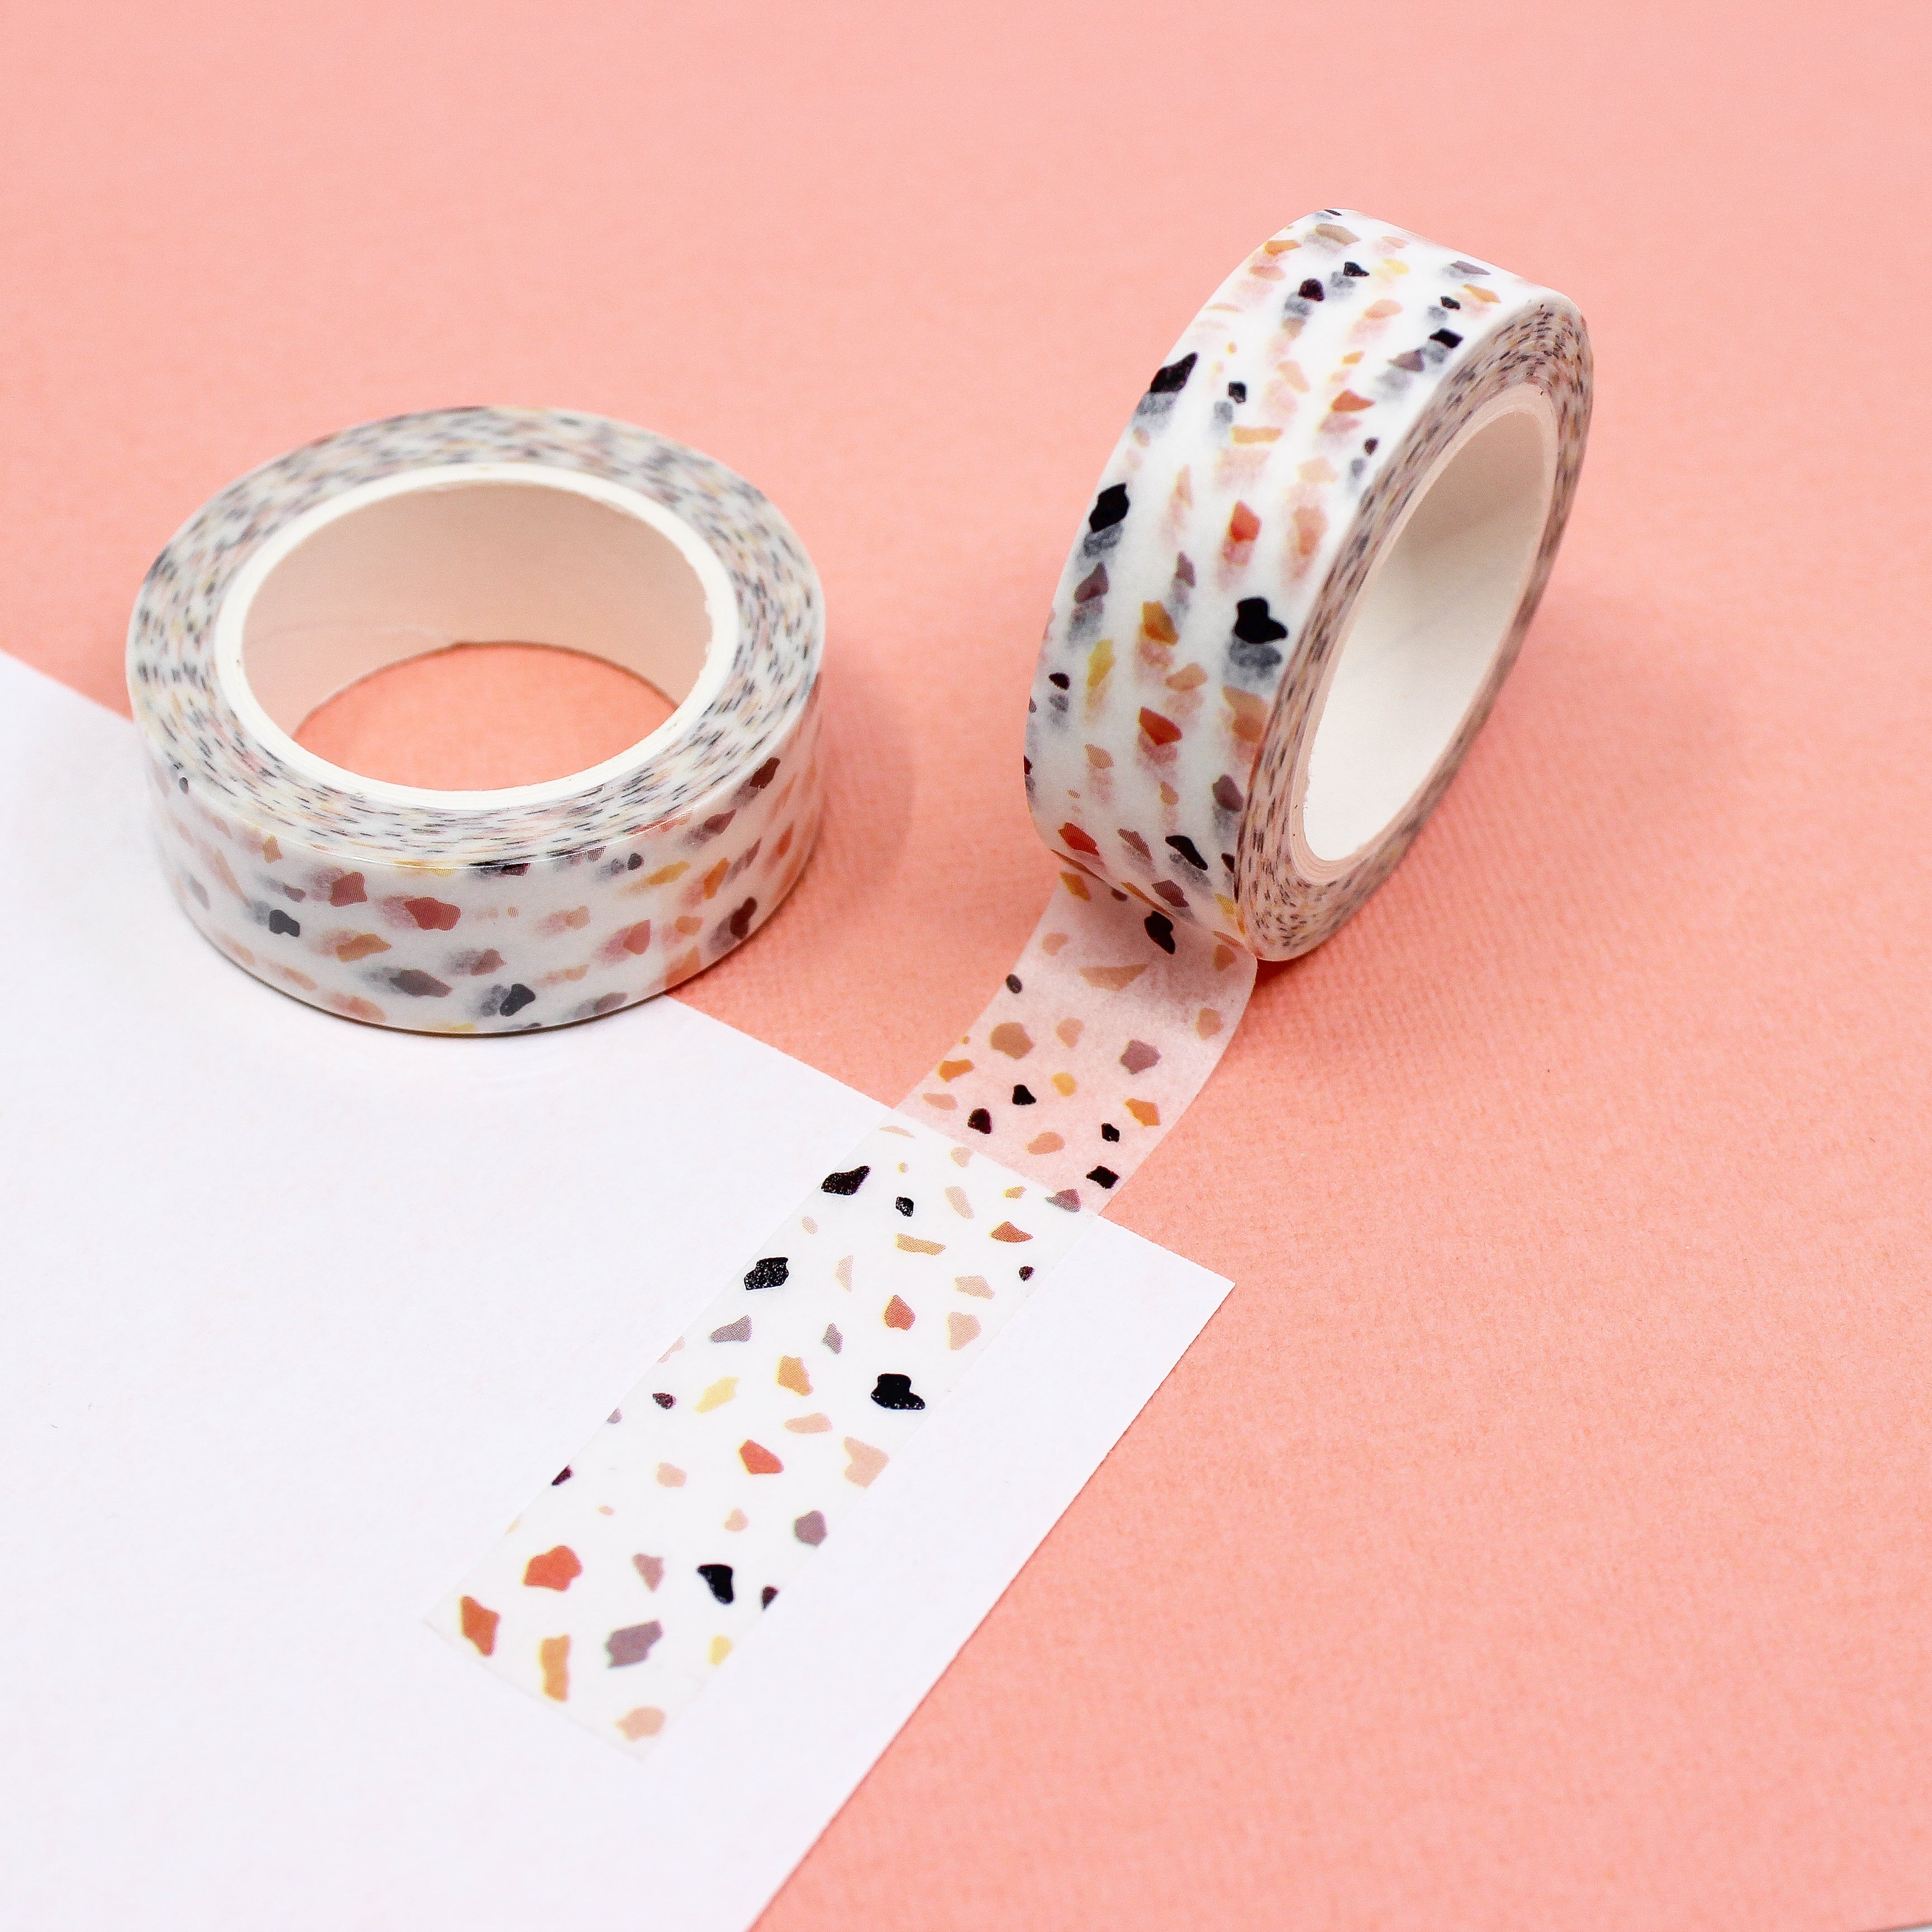 This is a pink marble themed washi tape from BBB Supplies Craft Shop